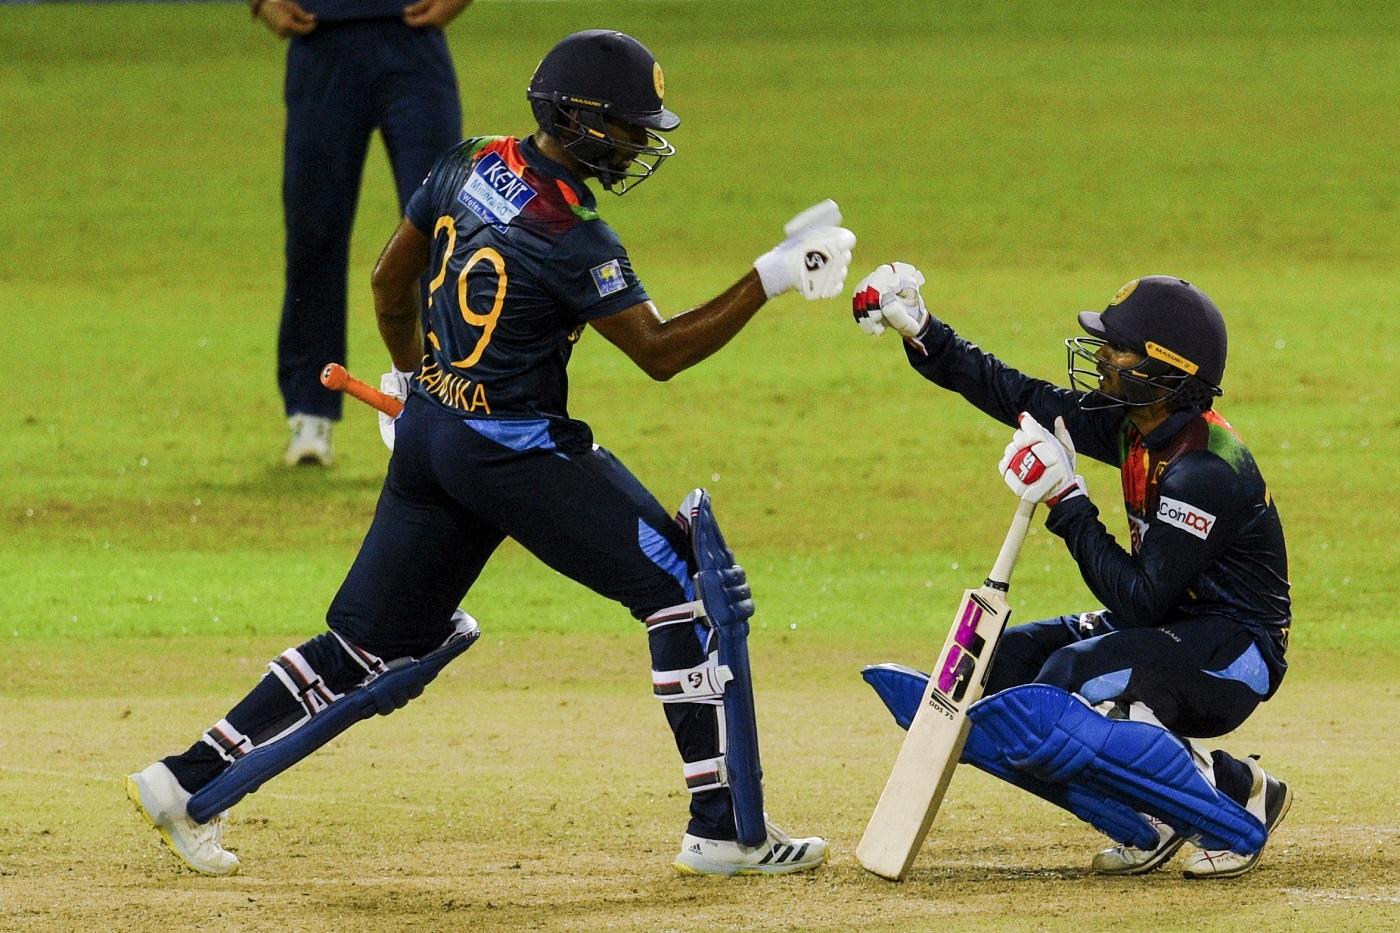 SL edge past depleted India to square series